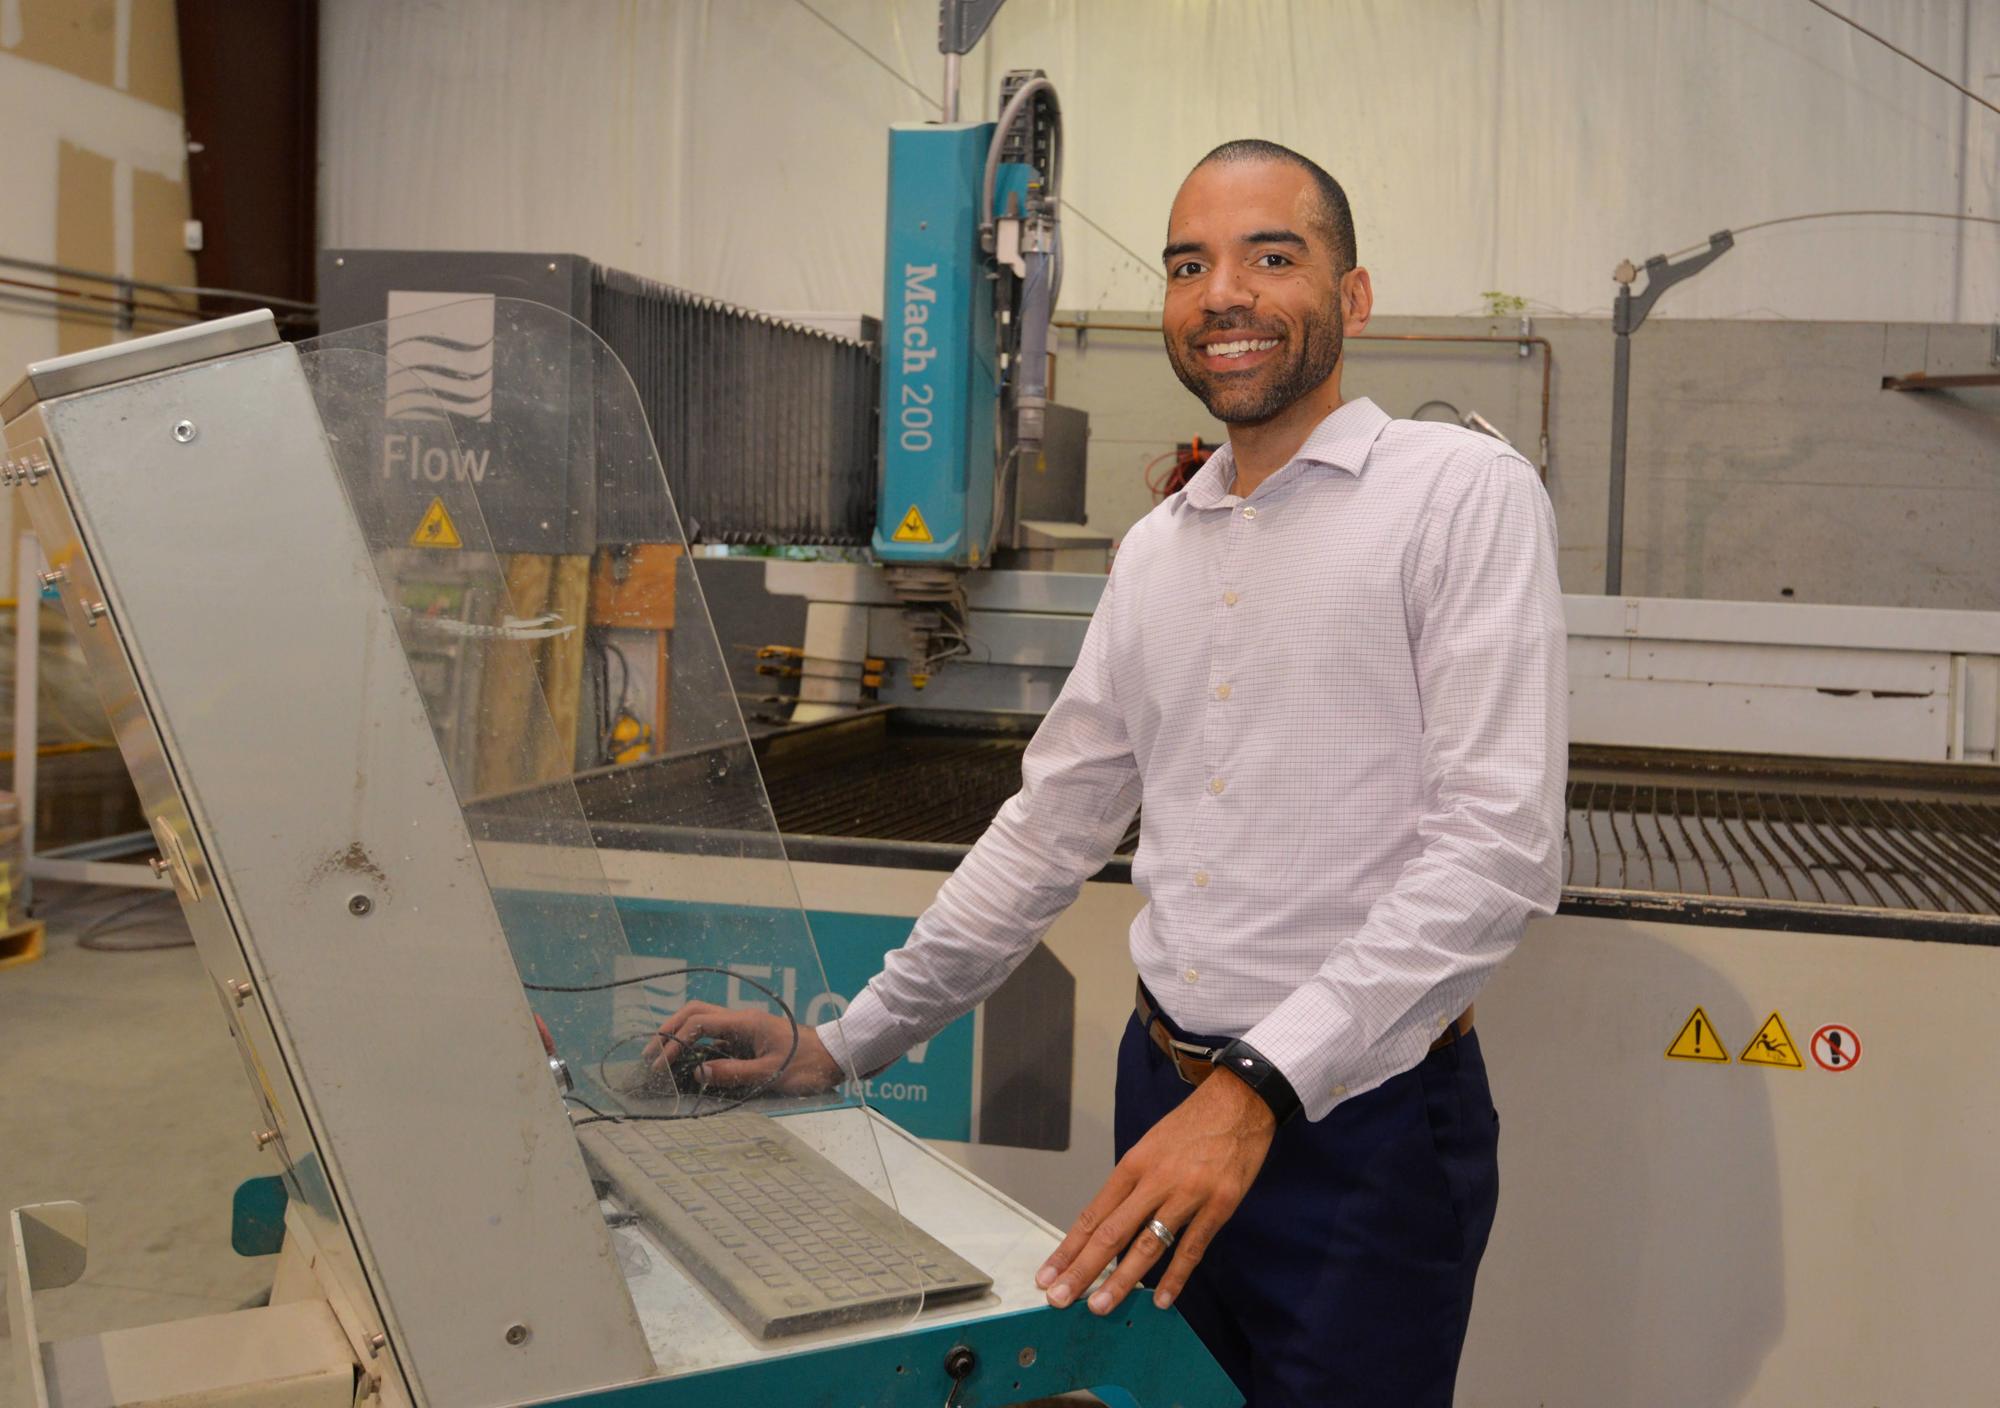 Viv Helwig, owner of Vested Metals International in St. Augustine, has been named the 2022 North Florida and Florida Small Business Exporter of the Year.